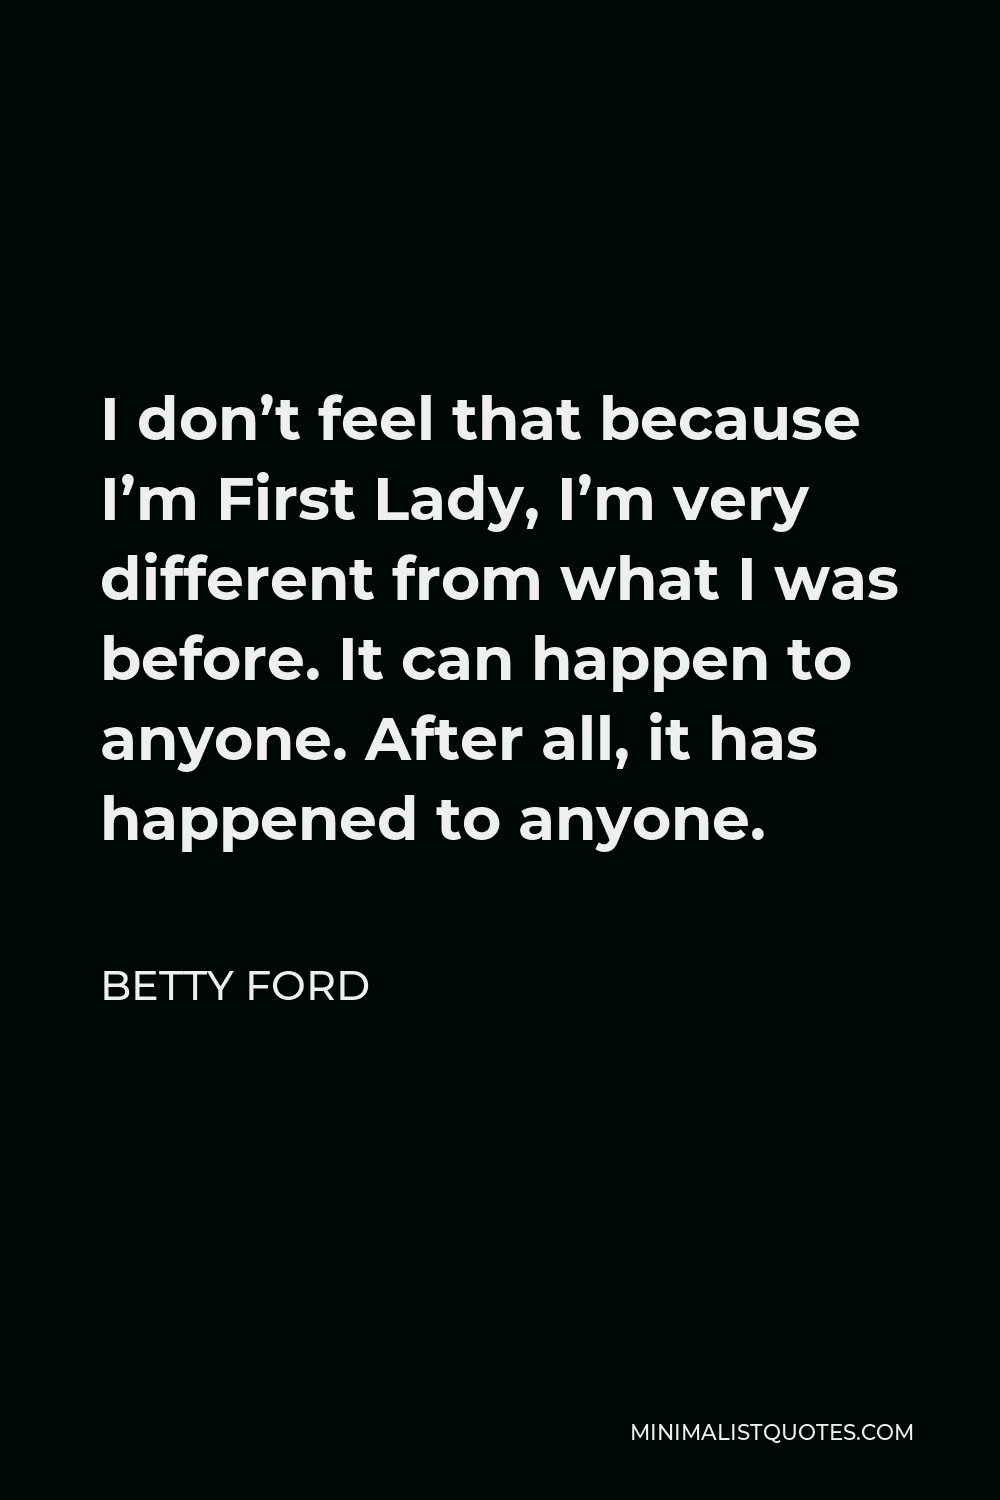 Betty Ford Quote - I don’t feel that because I’m First Lady, I’m very different from what I was before. It can happen to anyone. After all, it has happened to anyone.